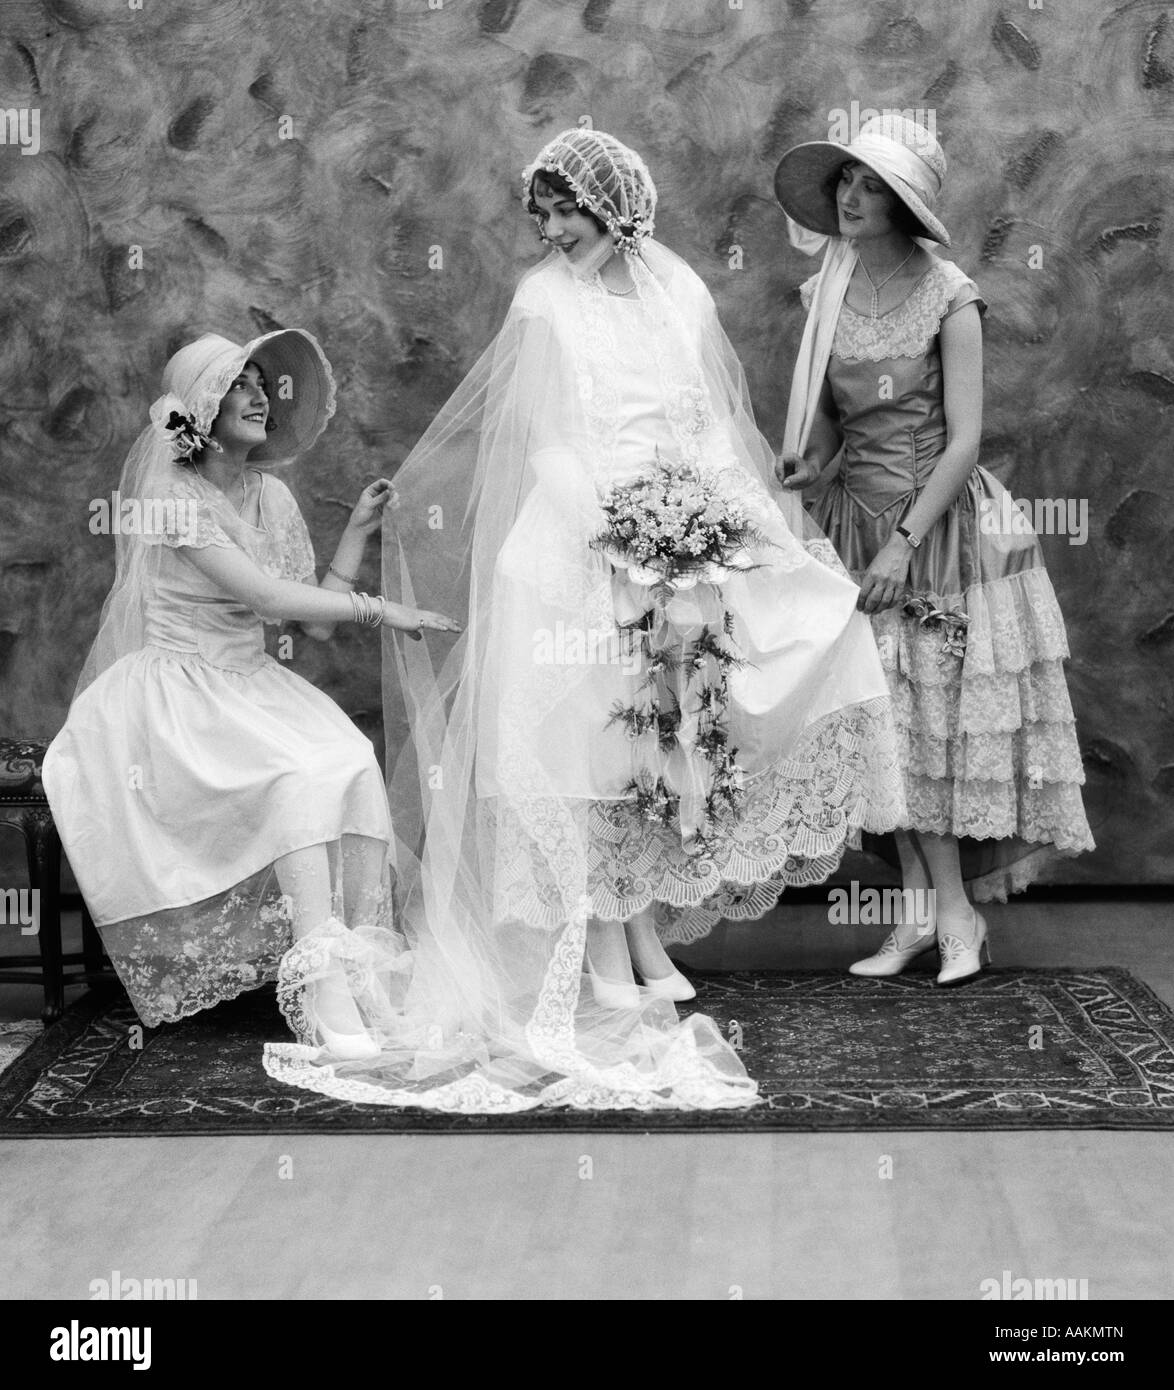 1900 1910s BRIDE WITH ONE BRIDESMAID ON EITHER SIDE HELPING FIX HER WEDDING DRESS Stock Photo